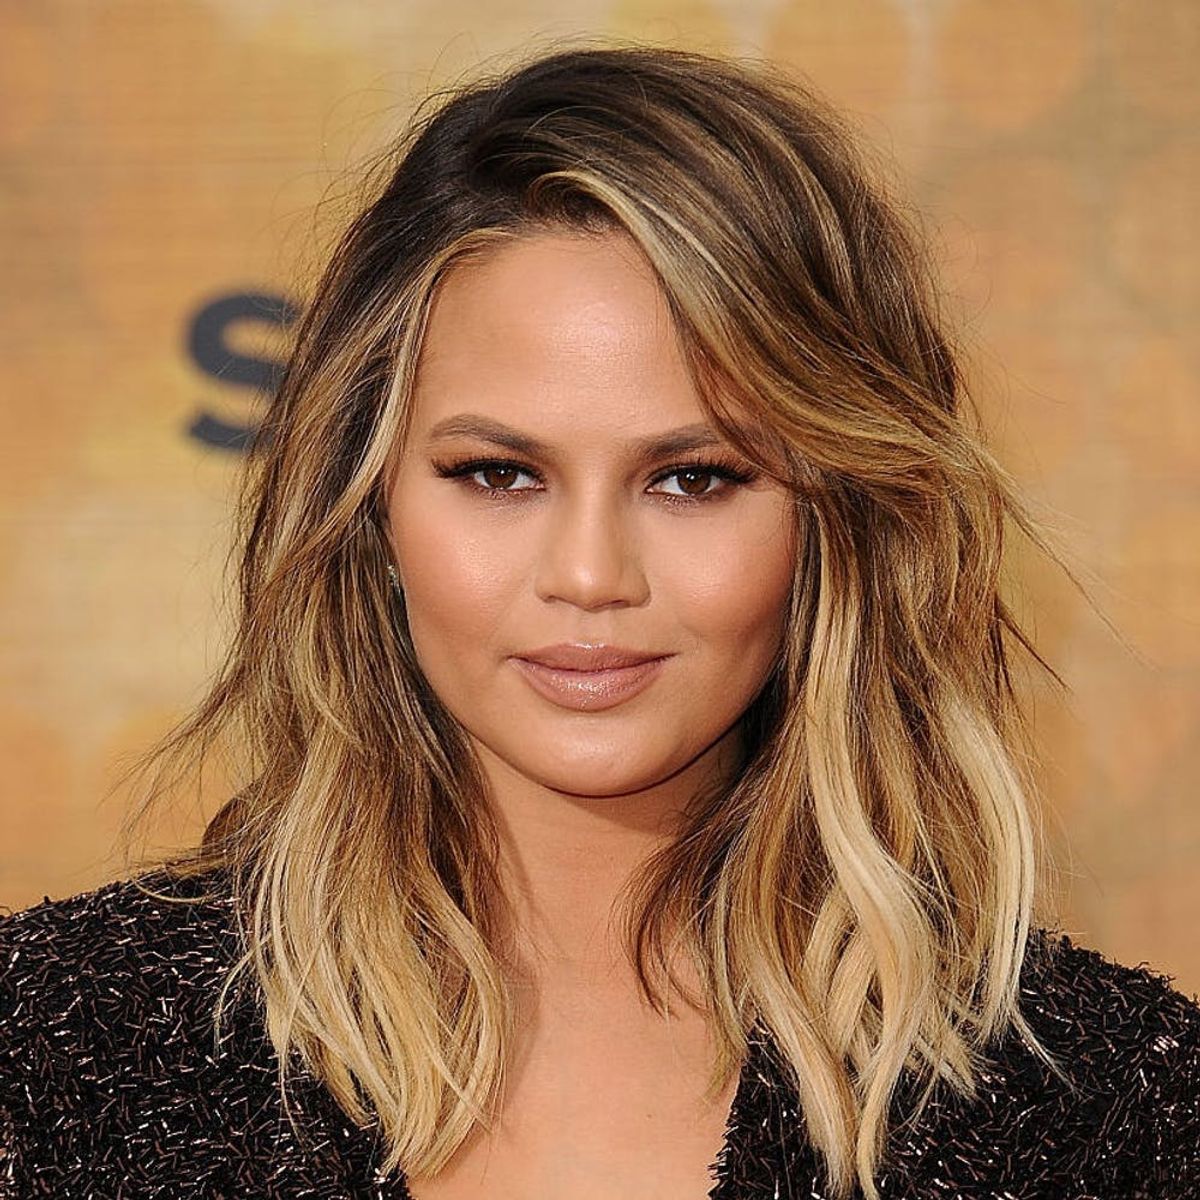 The Best Short Hairstyles to Flatter Your Face Shape